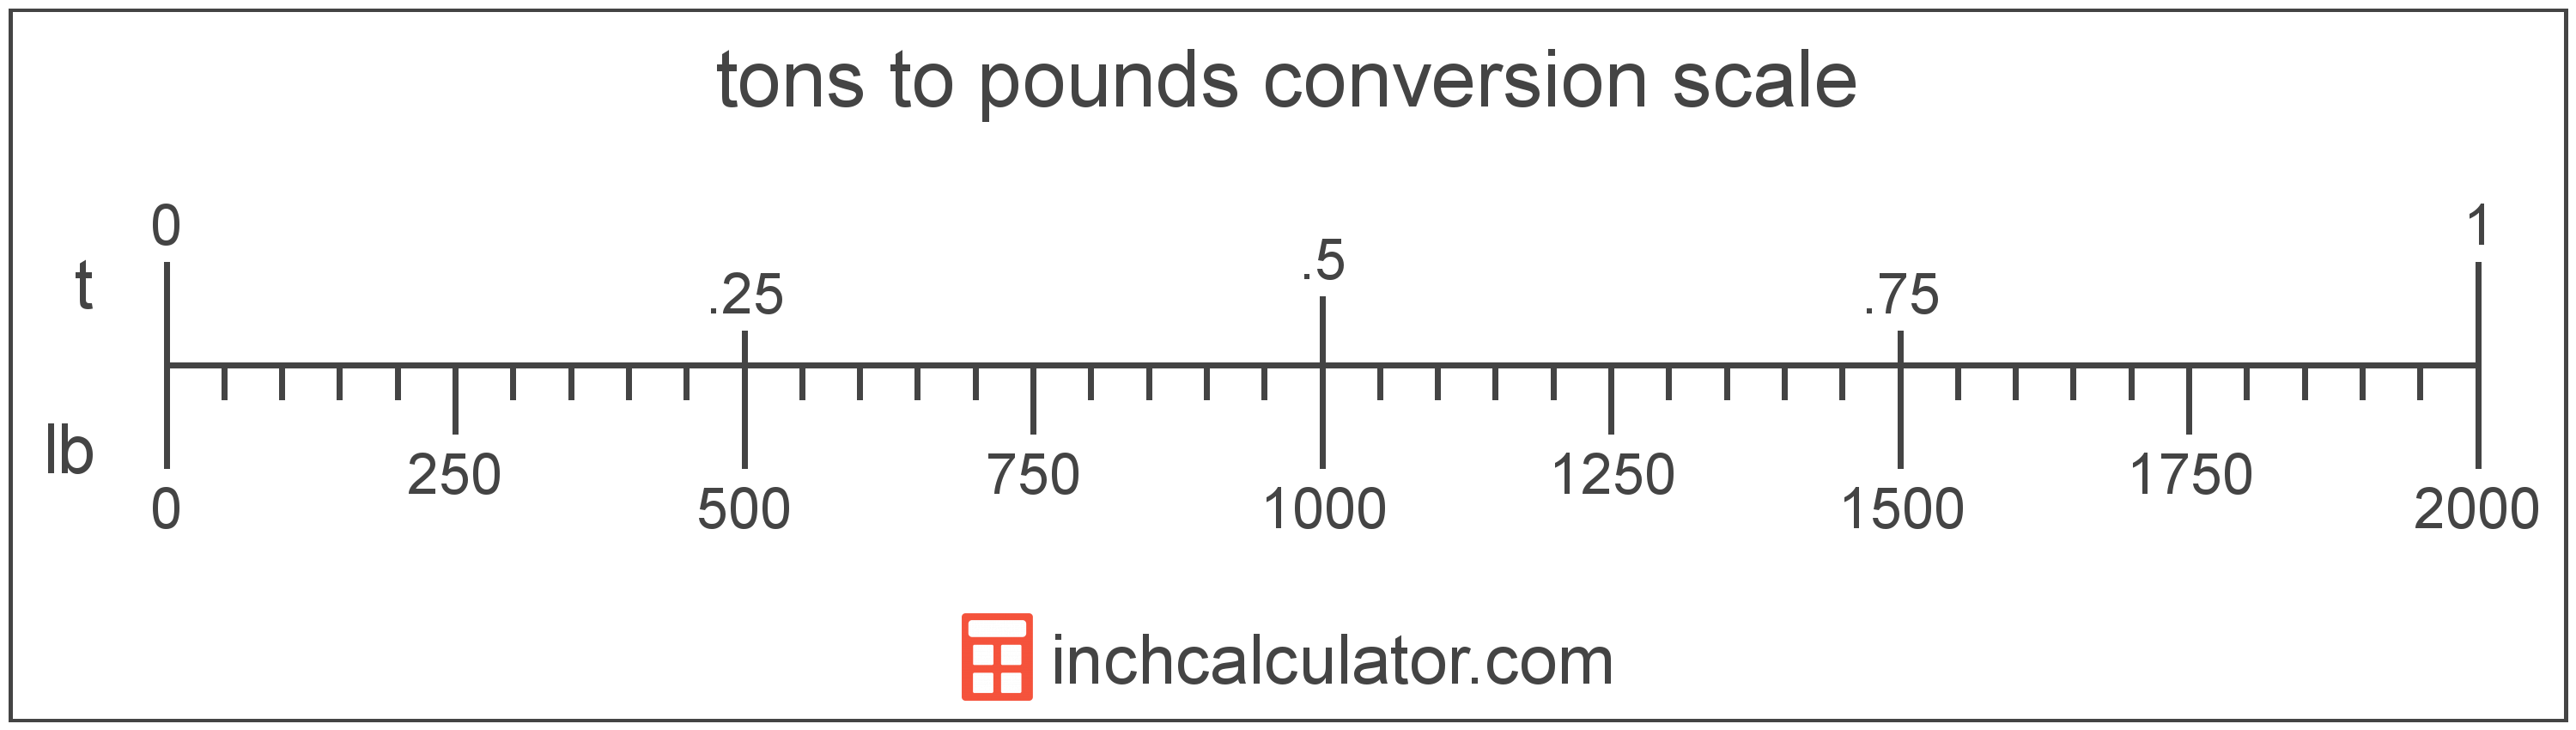 conversion scale showing pounds and equivalent tons weight values